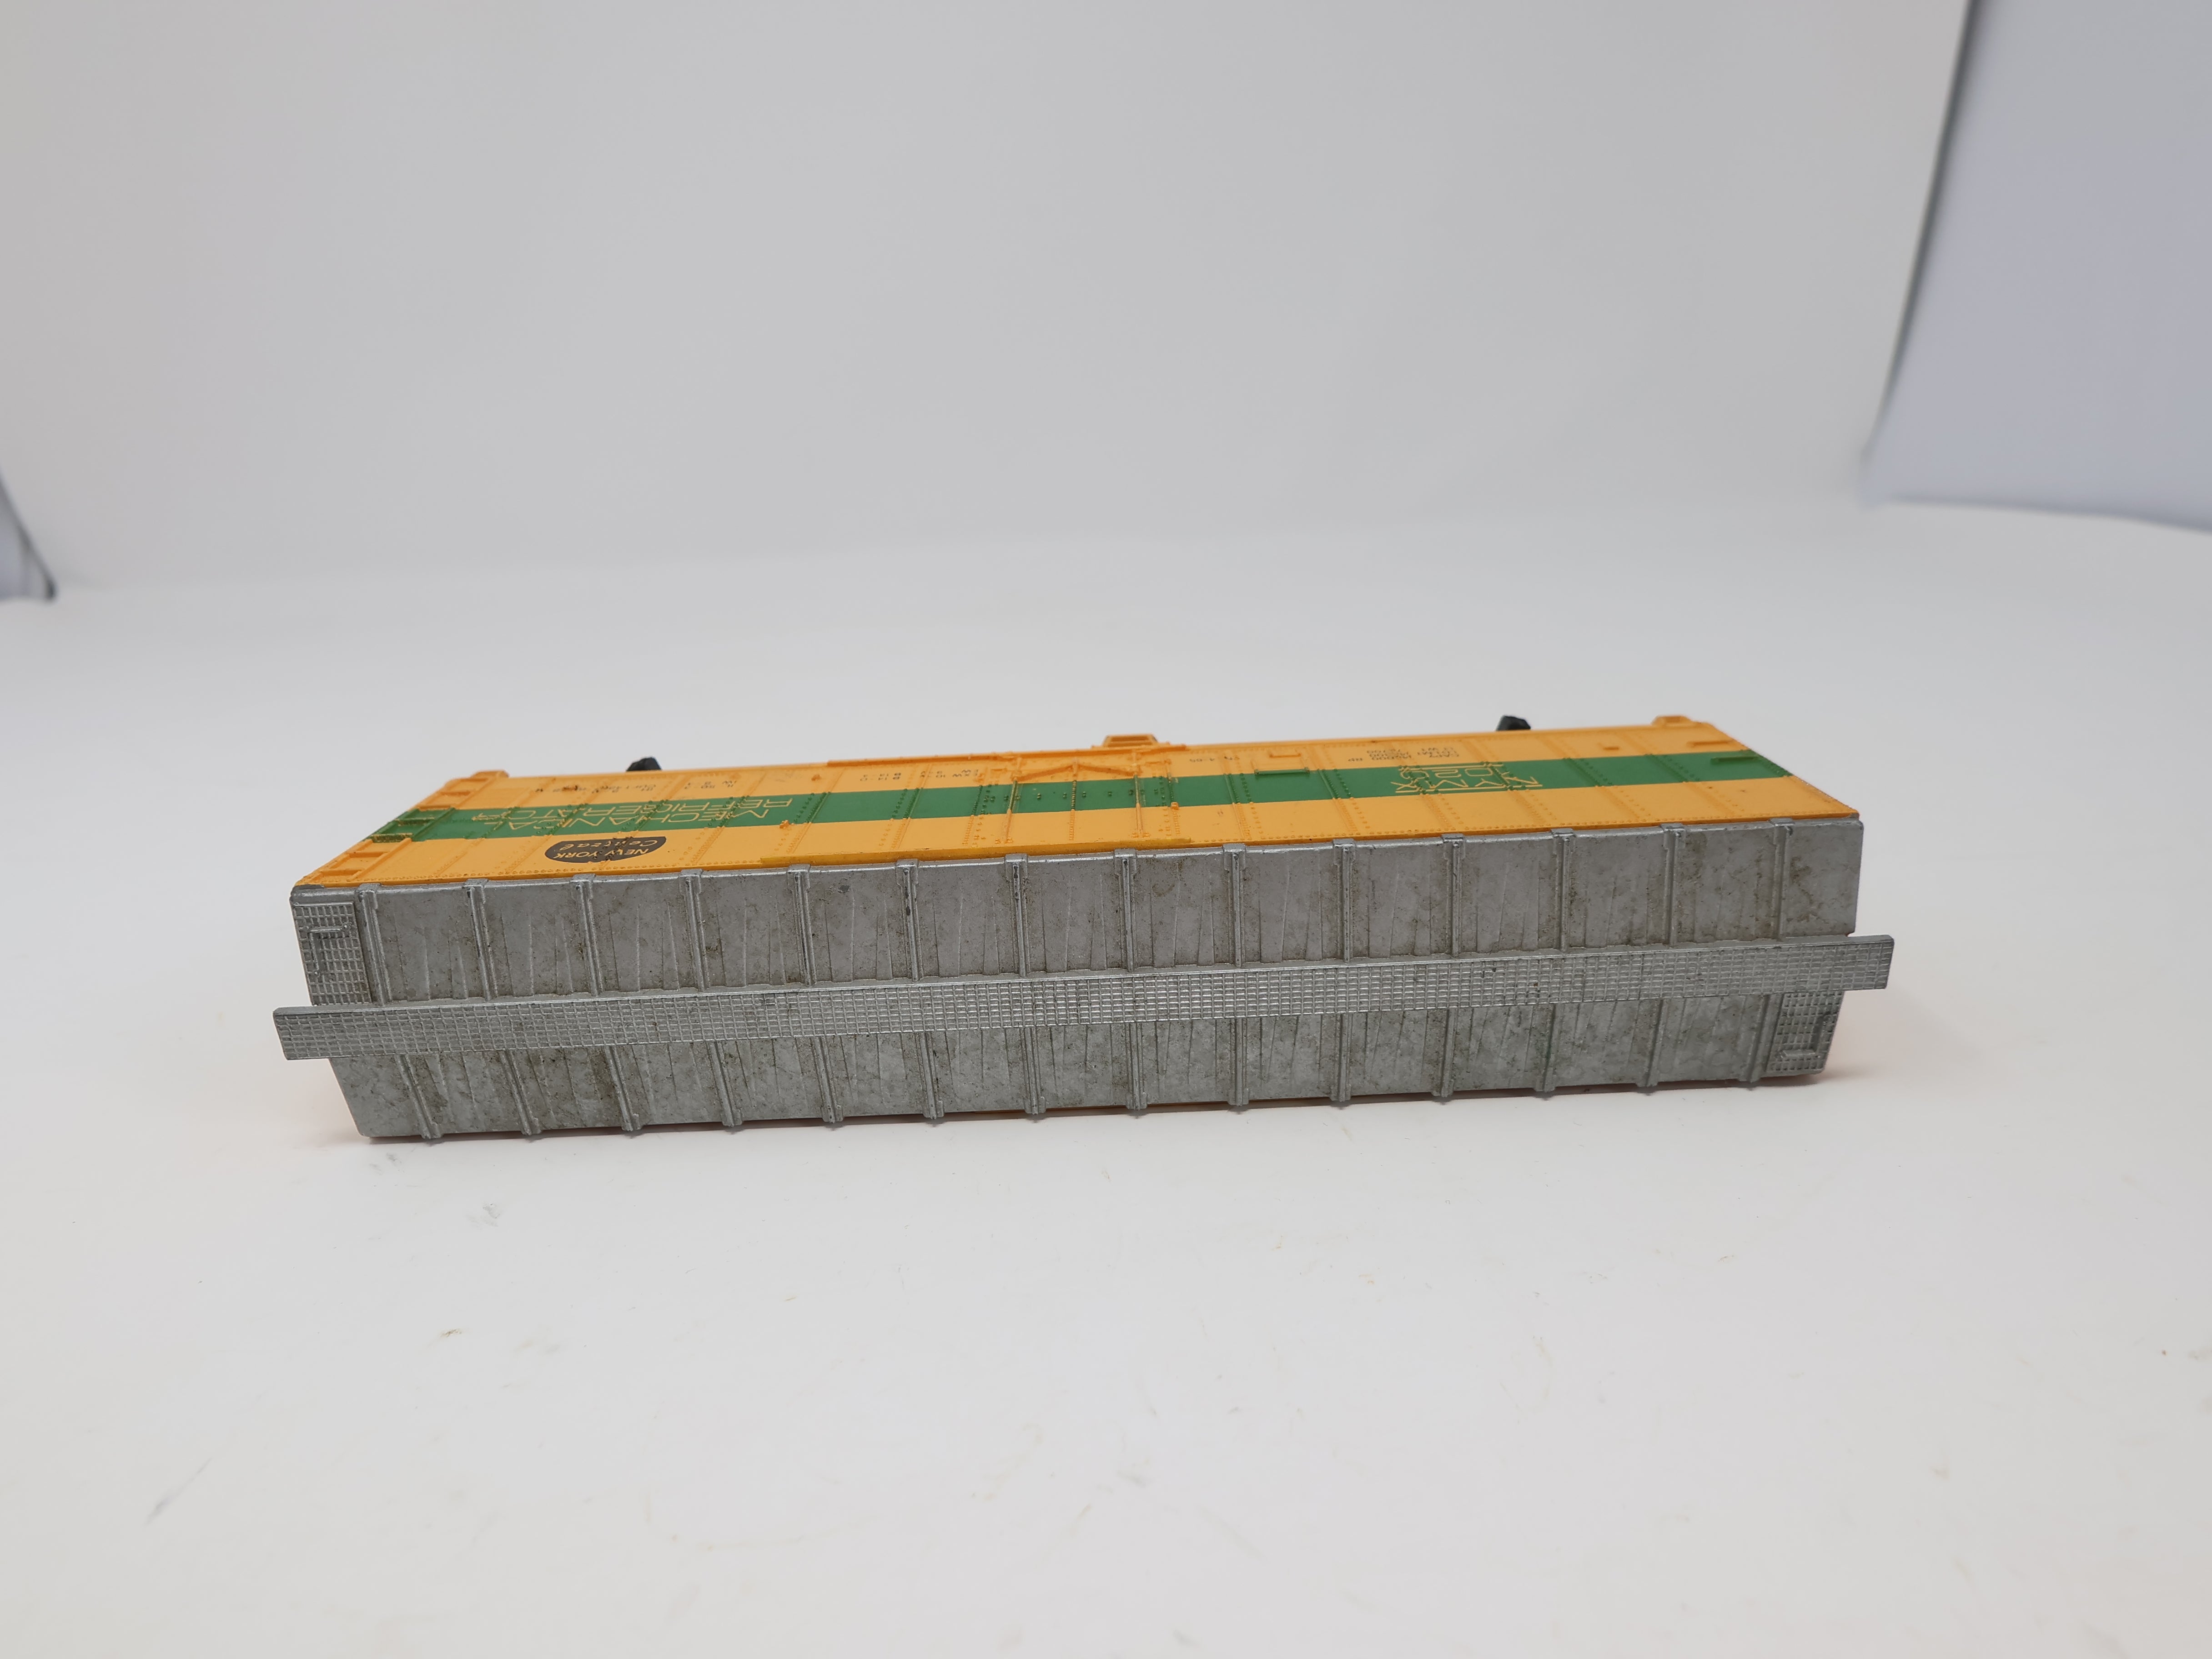 USED LIMA HO Scale, 50' Steel Box Car, New York Central NYMX #1020